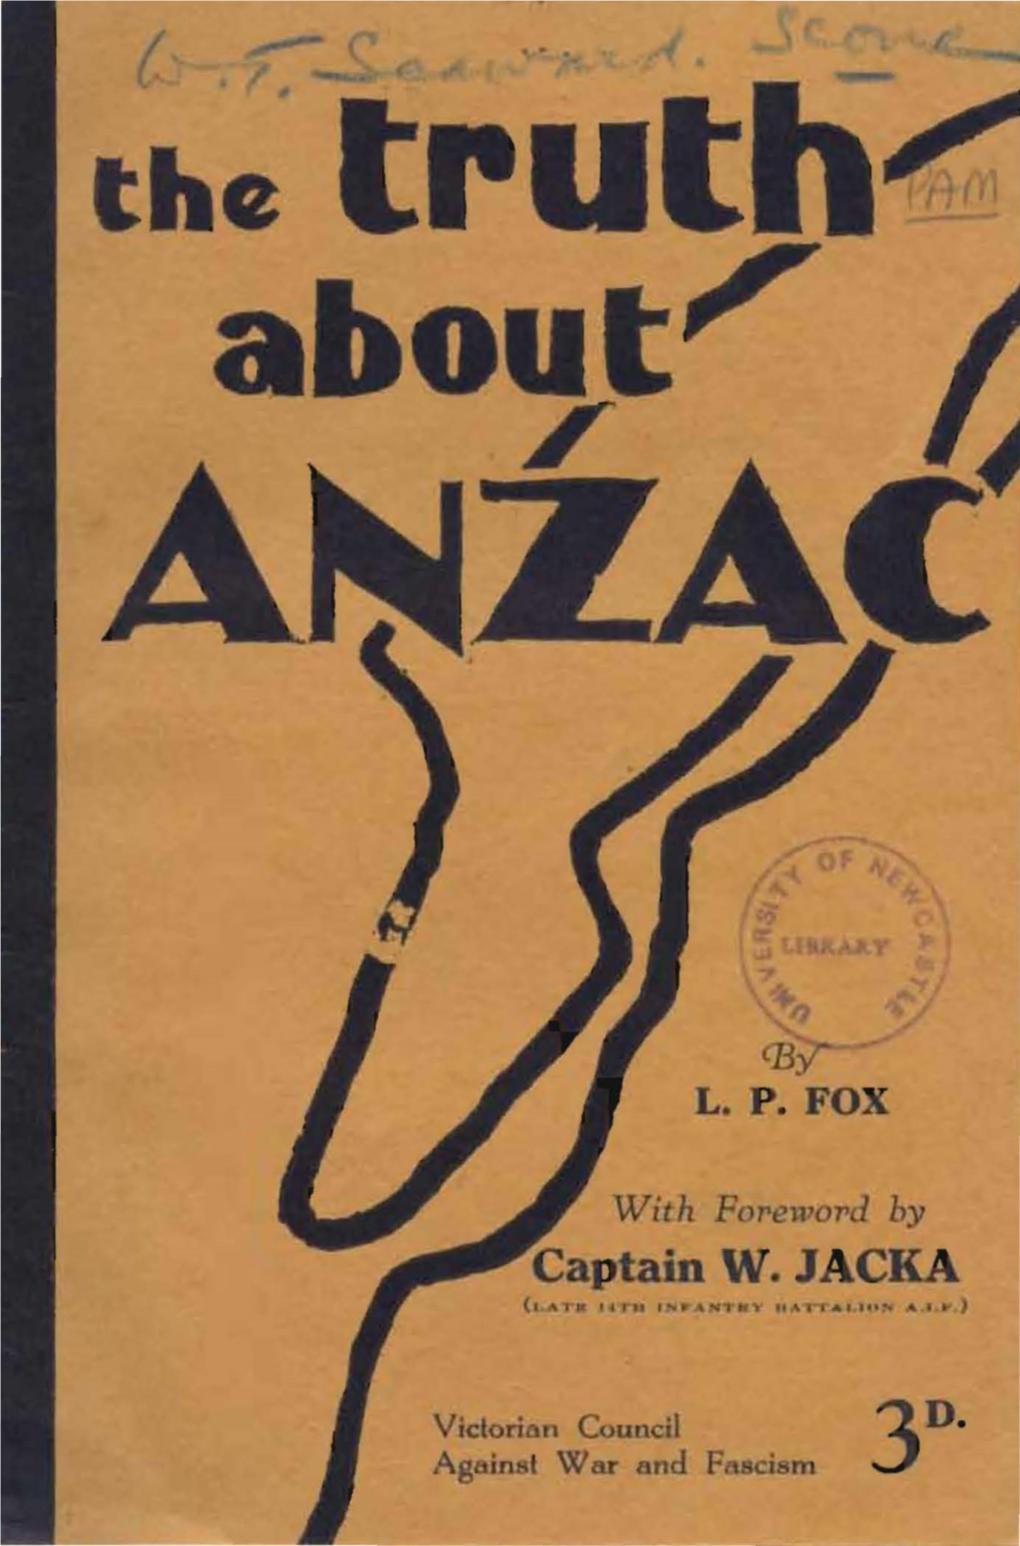 The Truth About ANZAC. Victorian Council Against War and Fascism, C